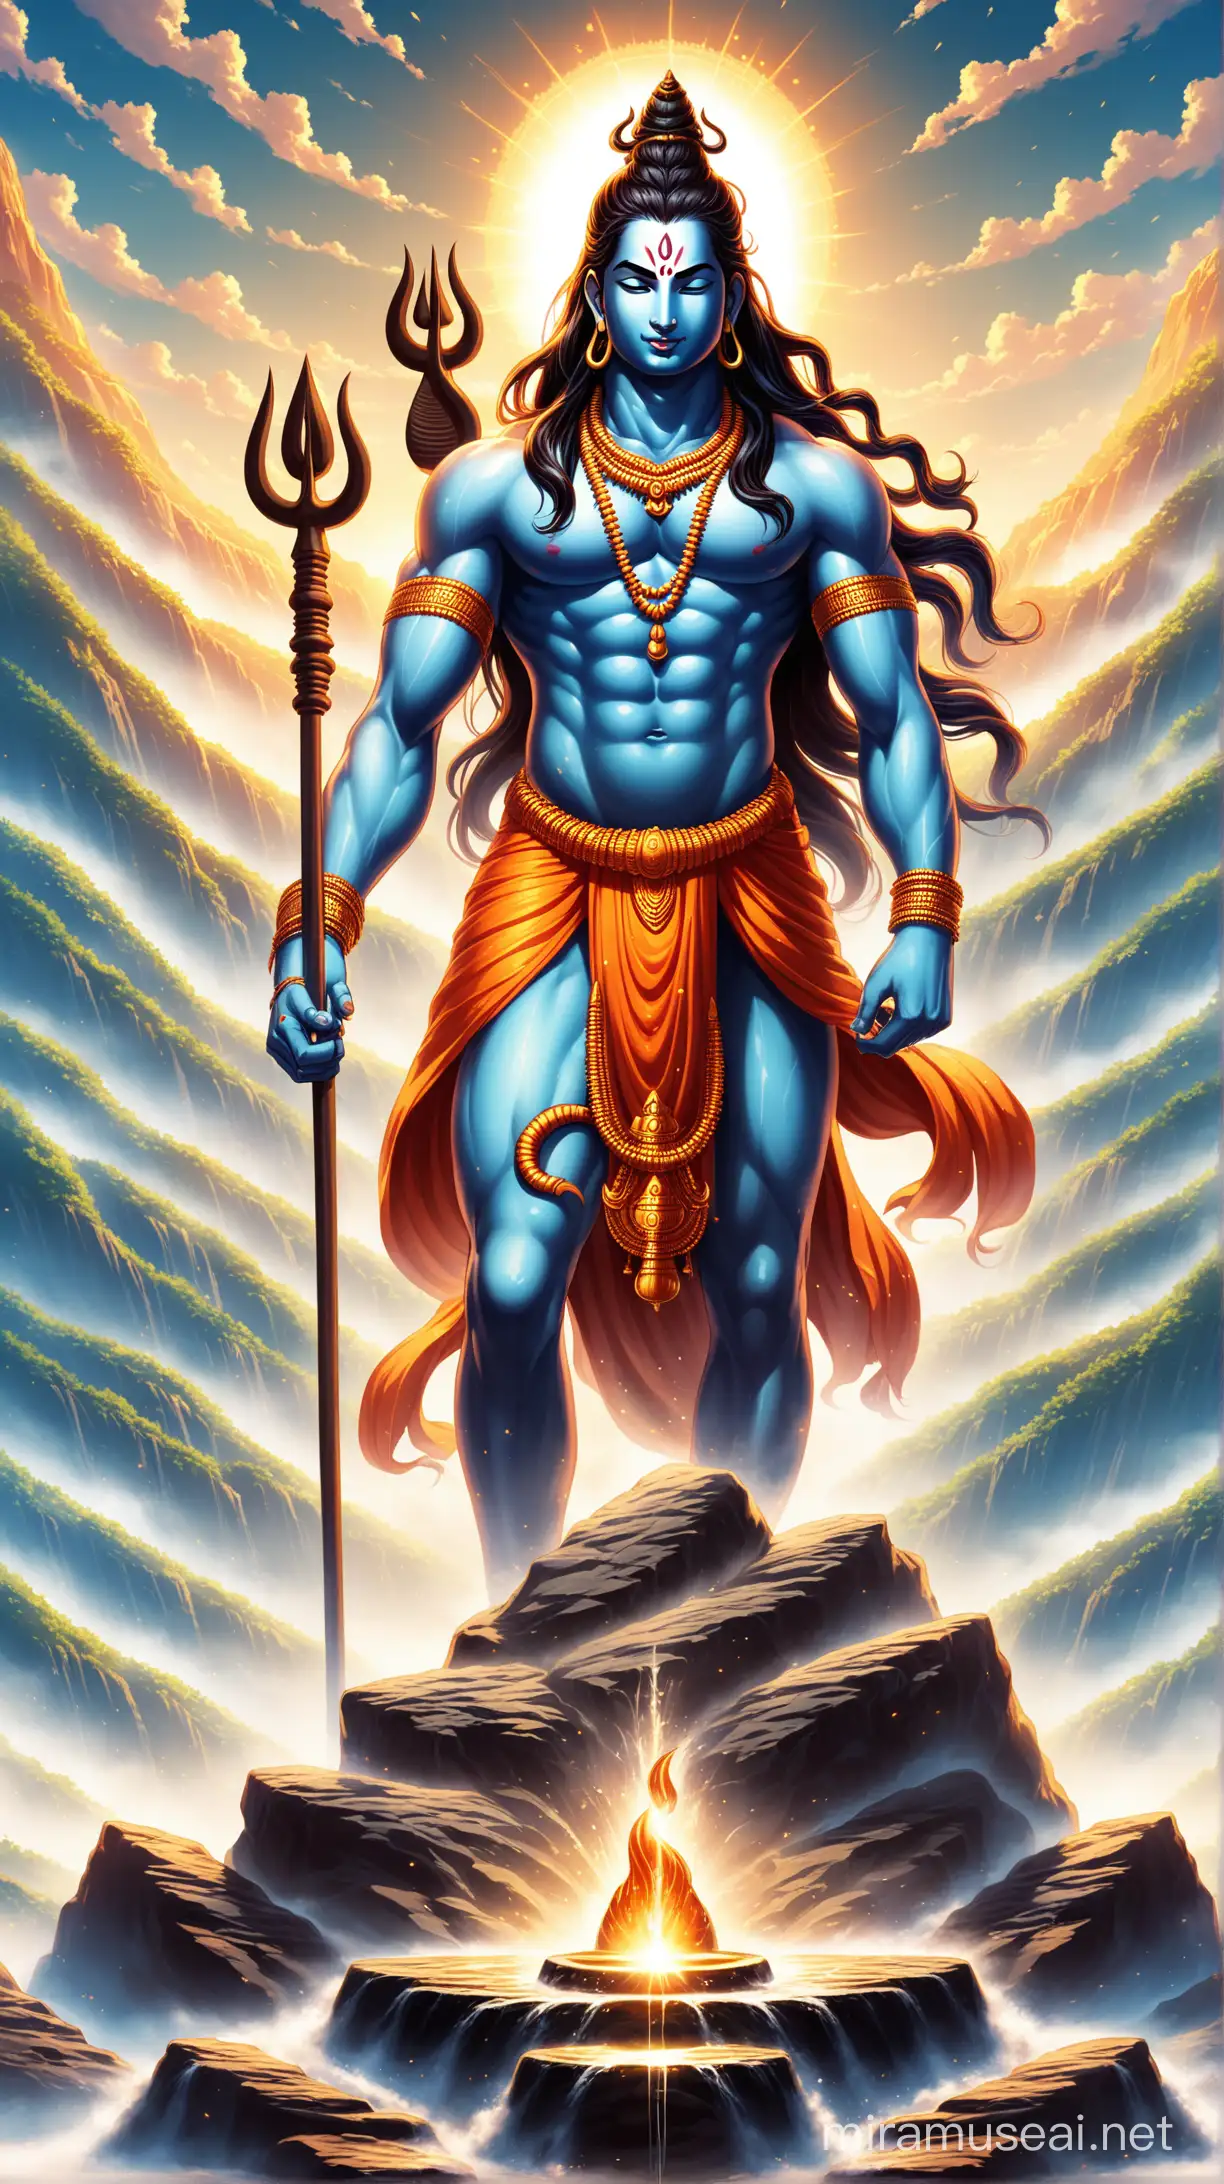 Lord Shiva, lord of lords, destroyer